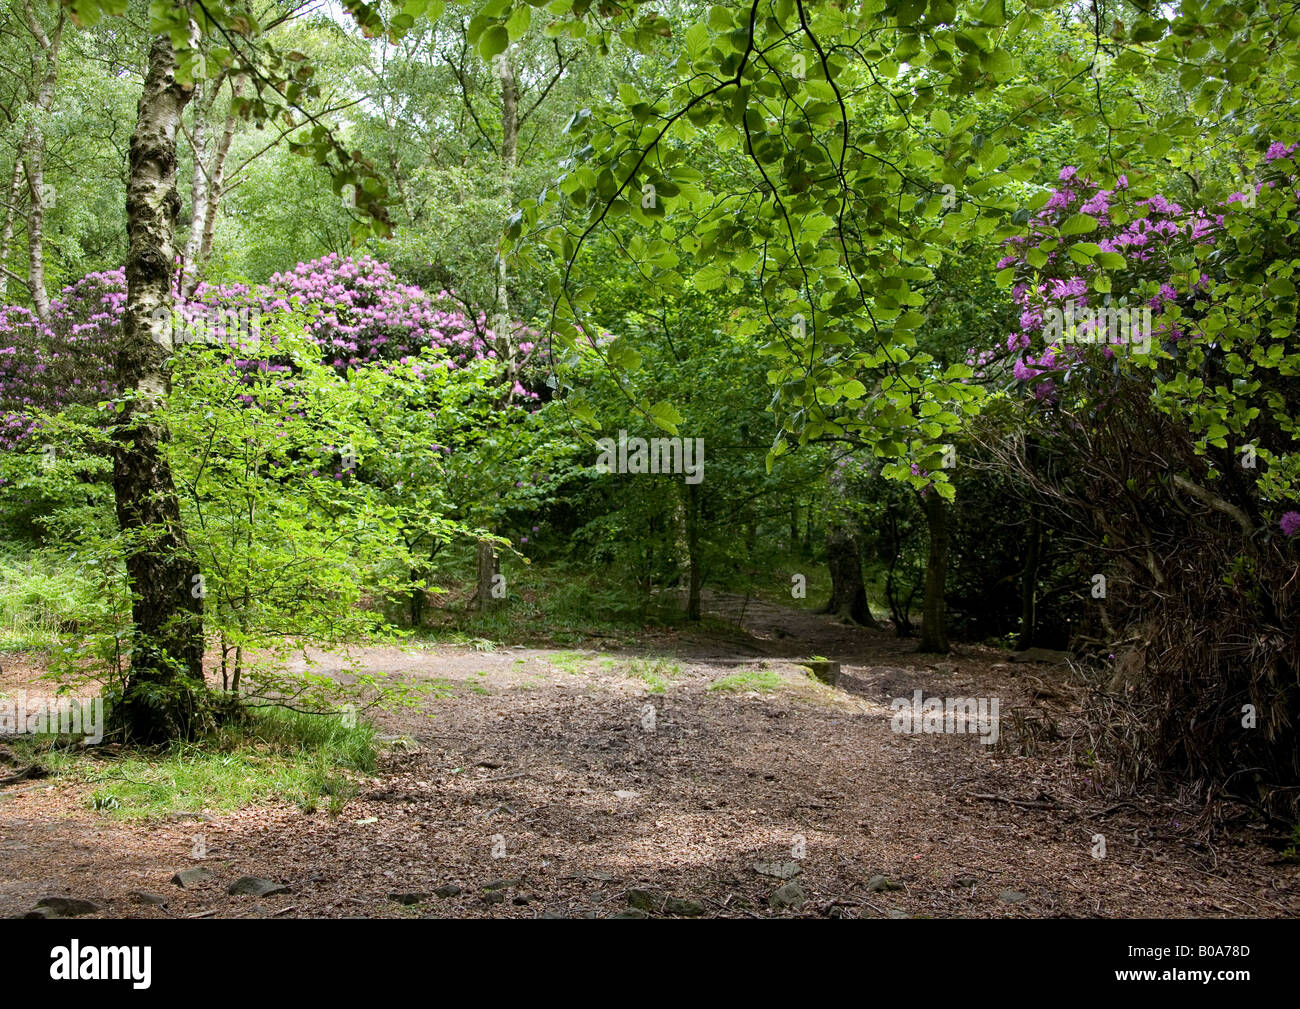 Summertime in Spring Wood, Whalley, Clitheroe, Lancashire, England. One of many managed woodland areas in The Ribble Valley. Stock Photo